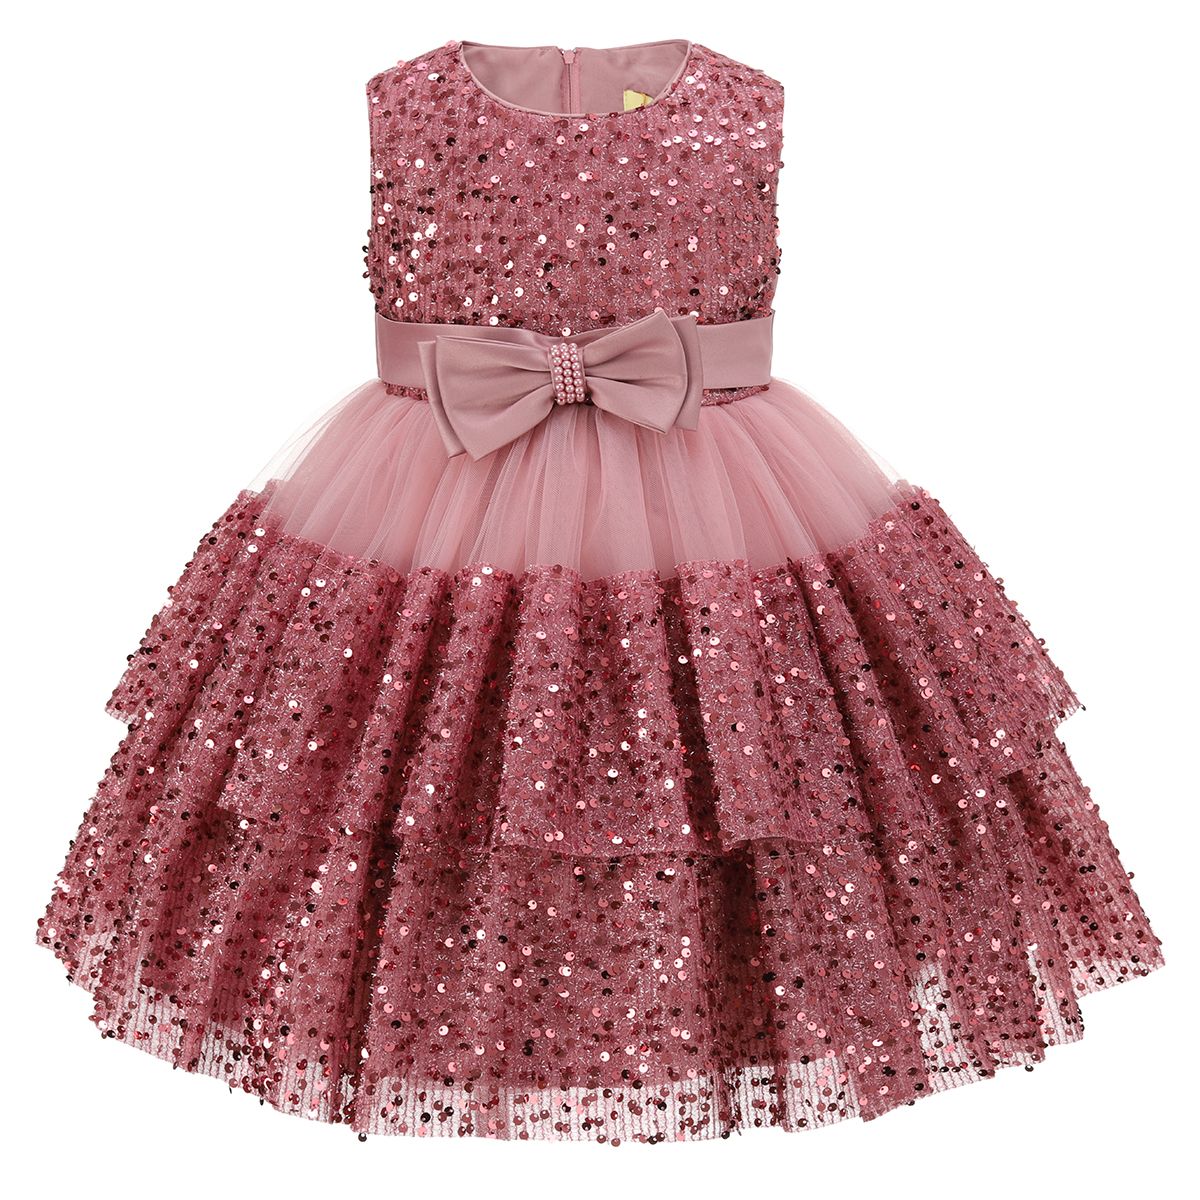 Layered Sequin Overlay Bow Dress